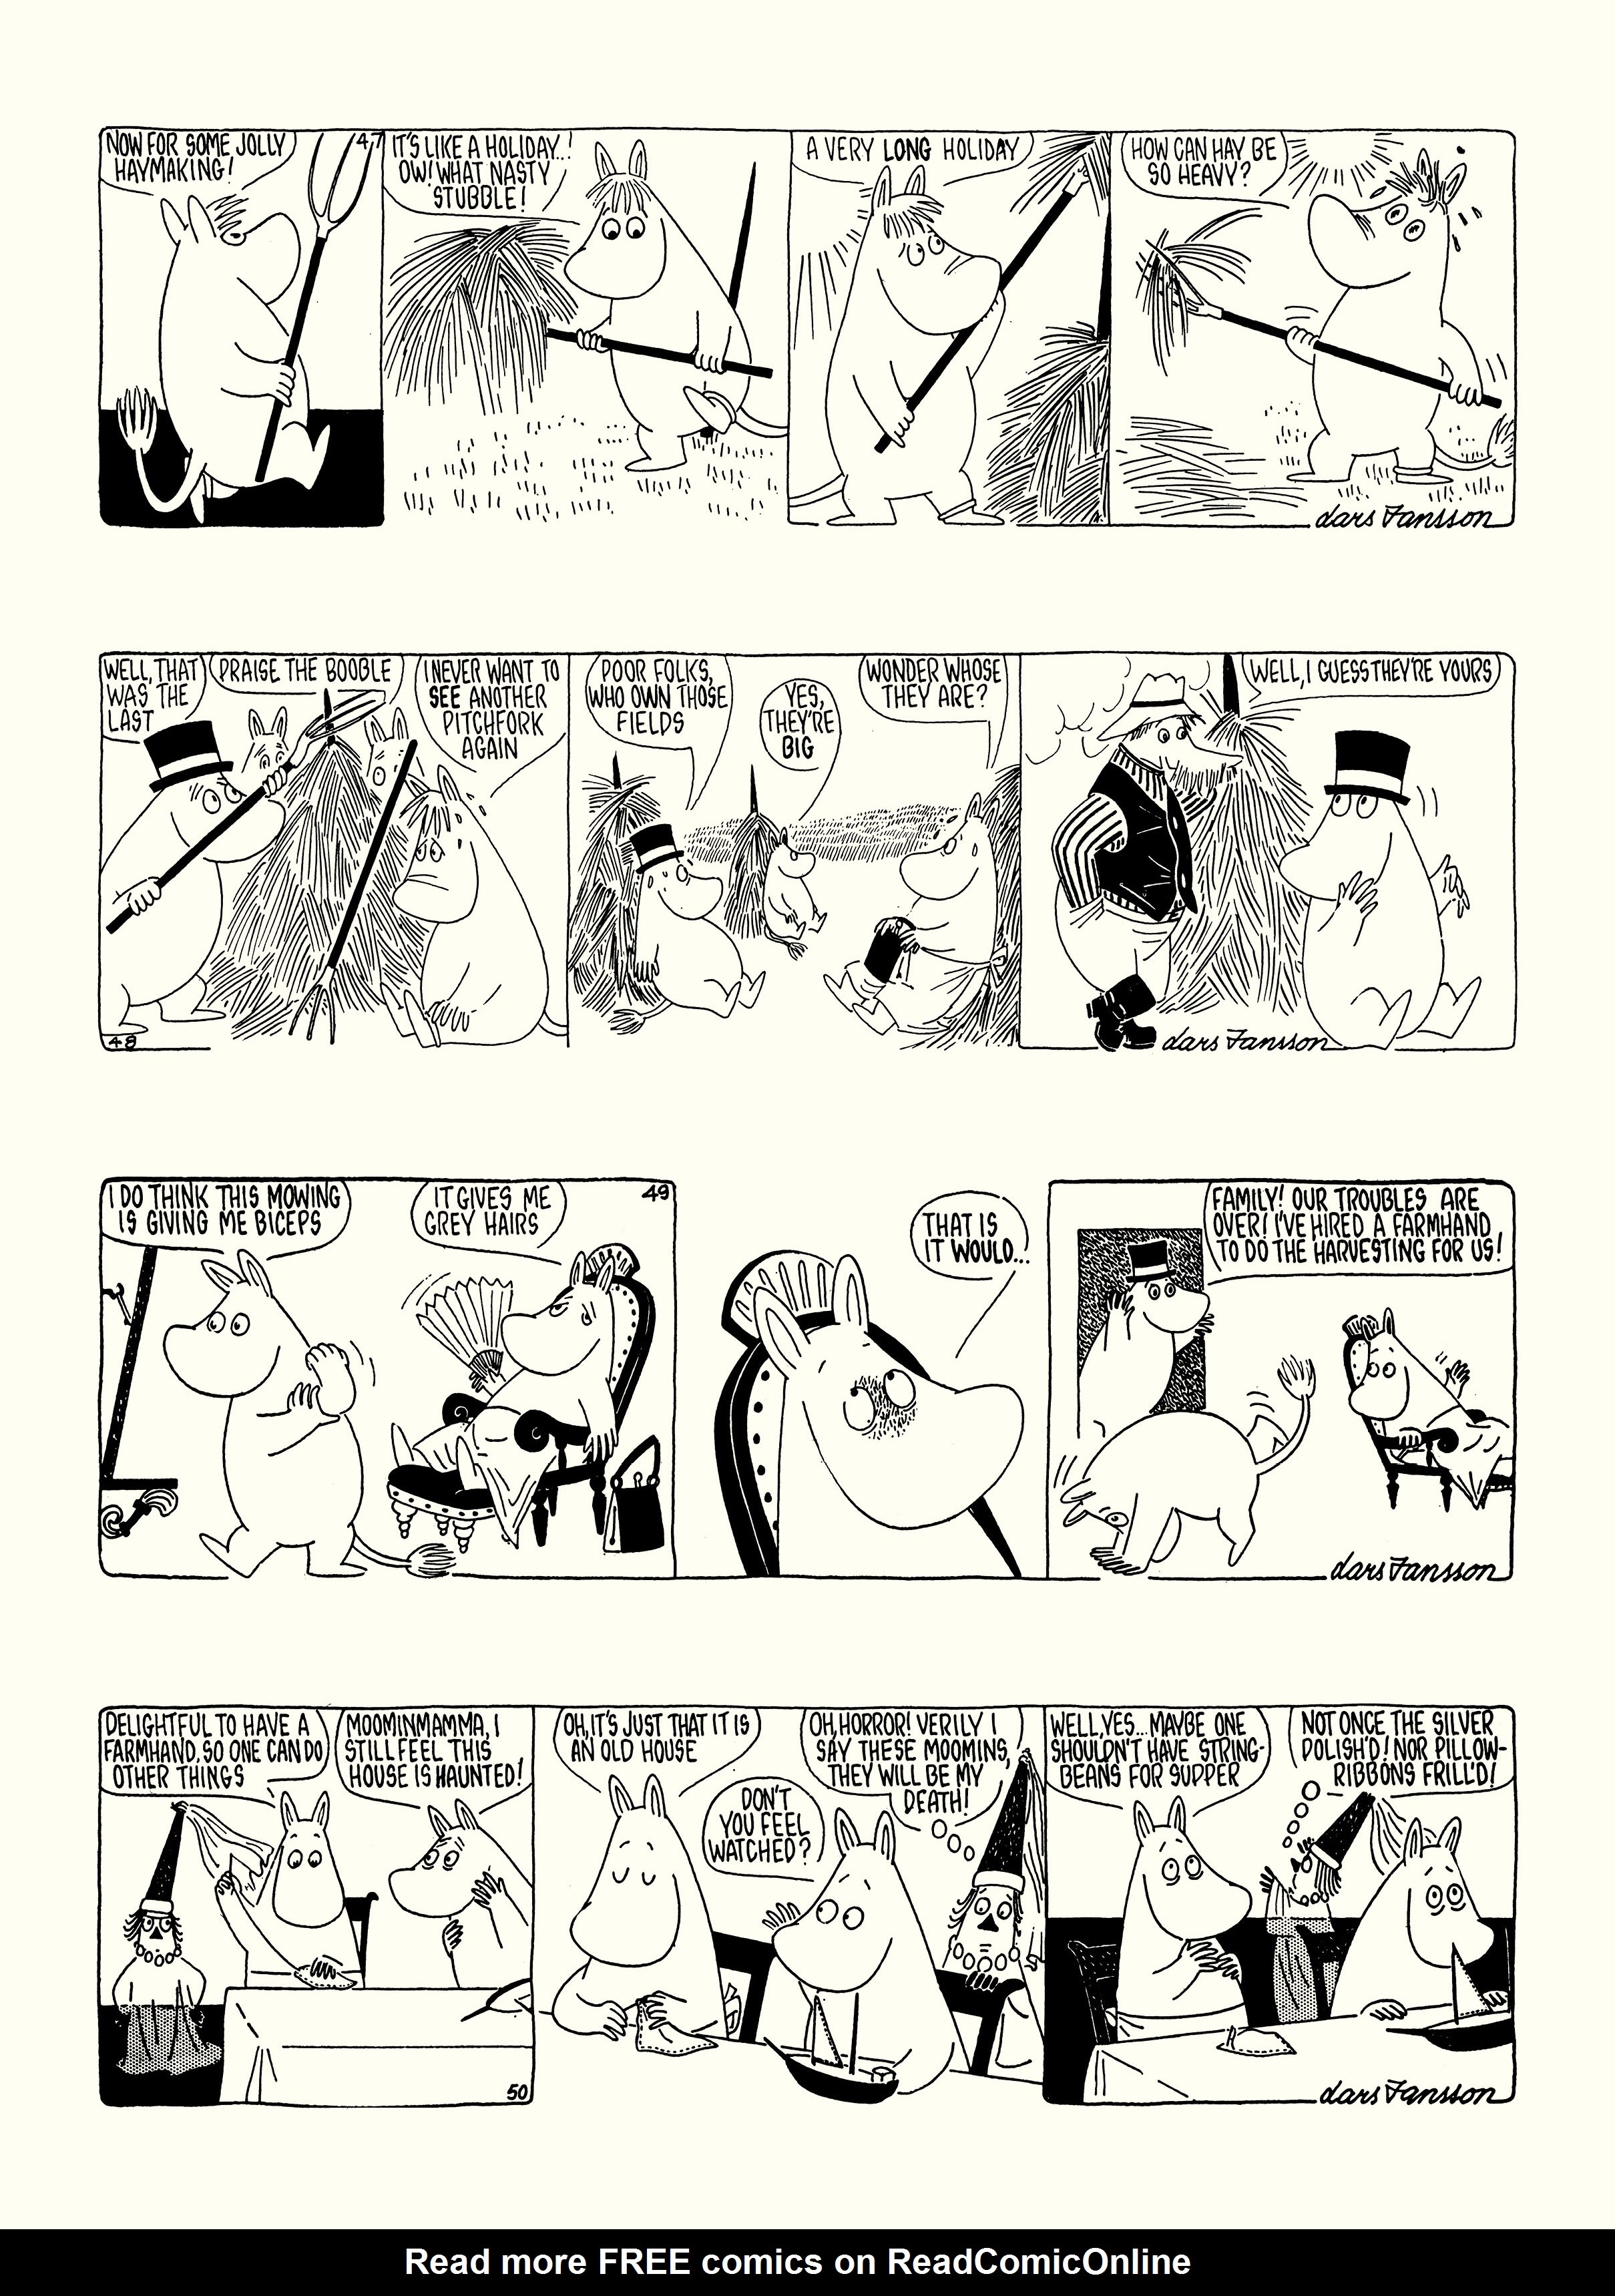 Read online Moomin: The Complete Lars Jansson Comic Strip comic -  Issue # TPB 7 - 60